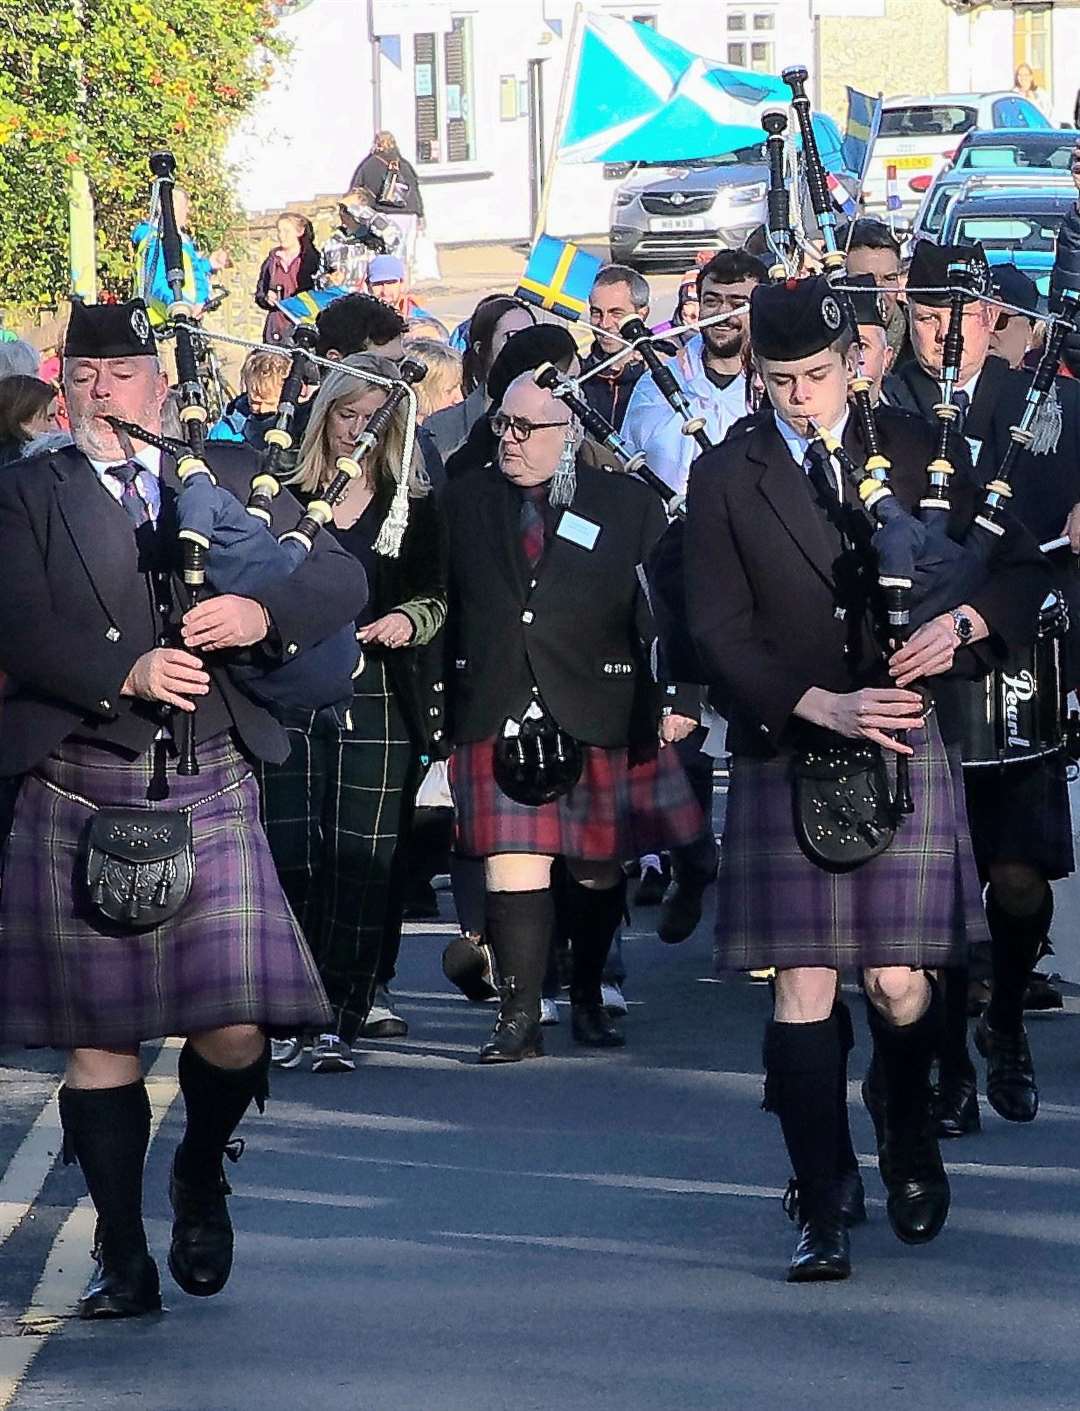 Charlie is their darling: joining the big parade at Carrbridge at one of the world championships is chieftain Charlie Miller (centre)